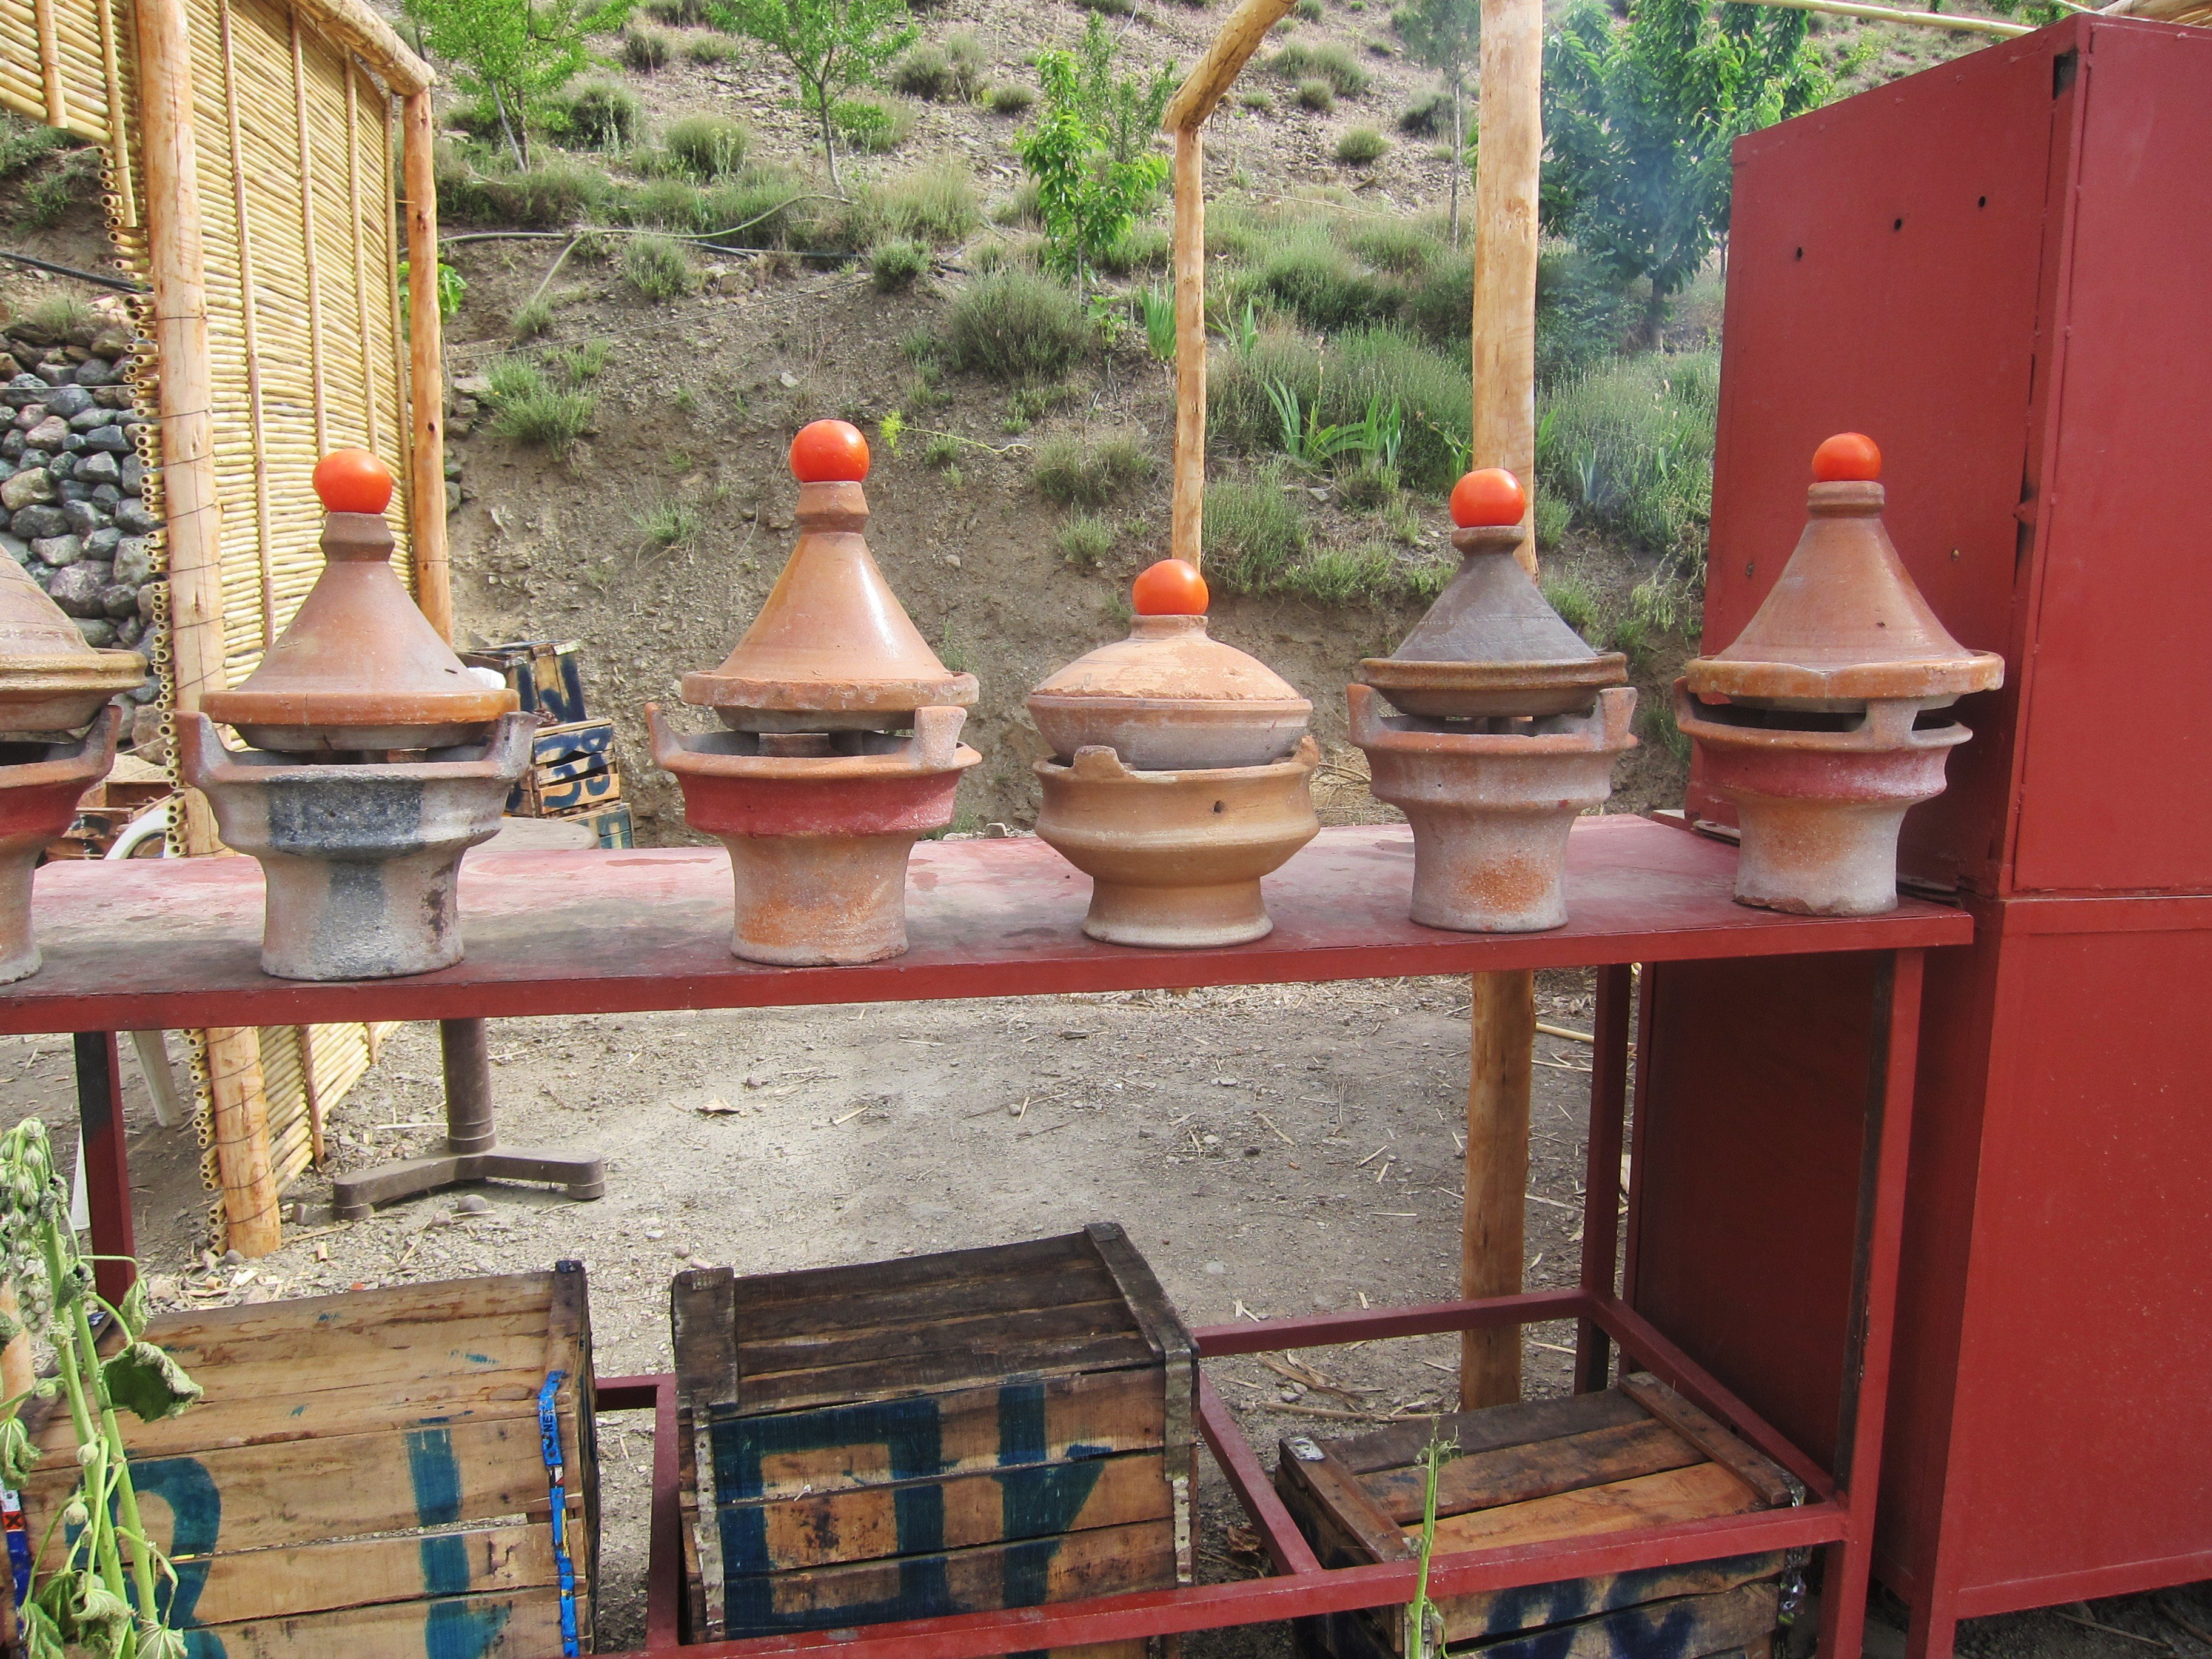 Roadside Tagines enroute from the Sahara to Marrakech